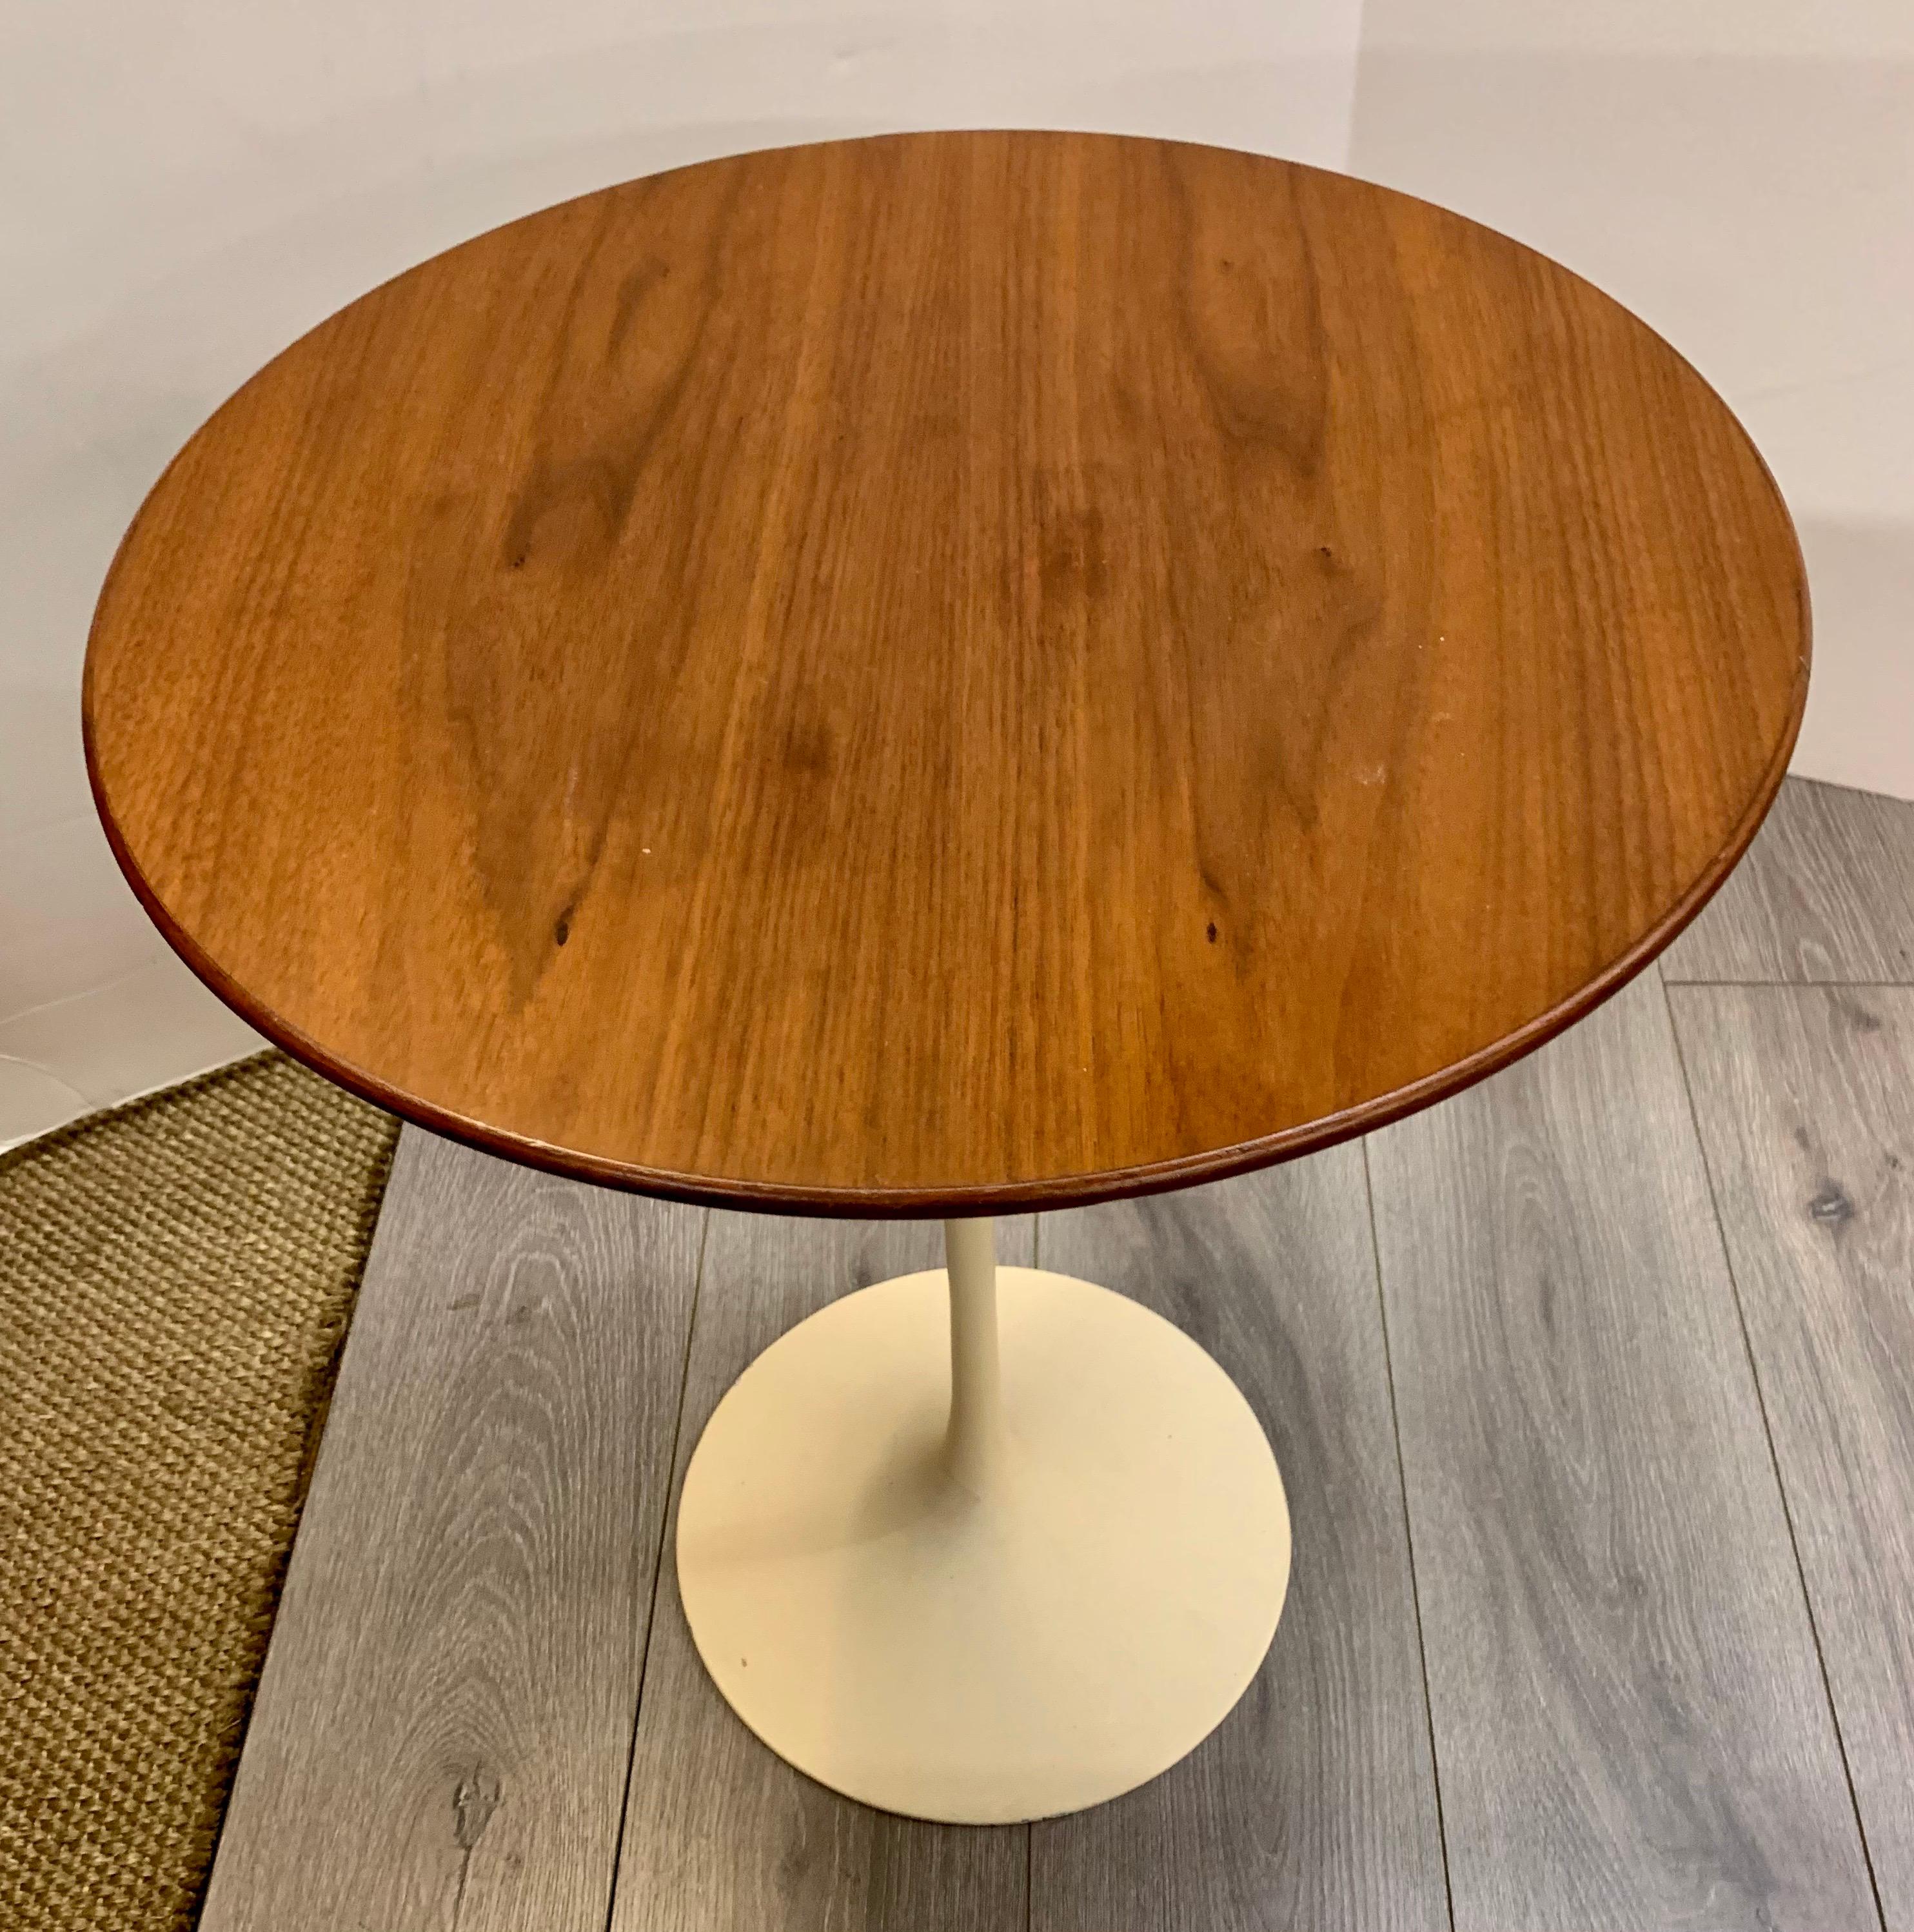 Classic tulip side table designed by Eero Saarinen and manufactured by Knoll. This table has a 20 inch diameter walnut top and white metal base.